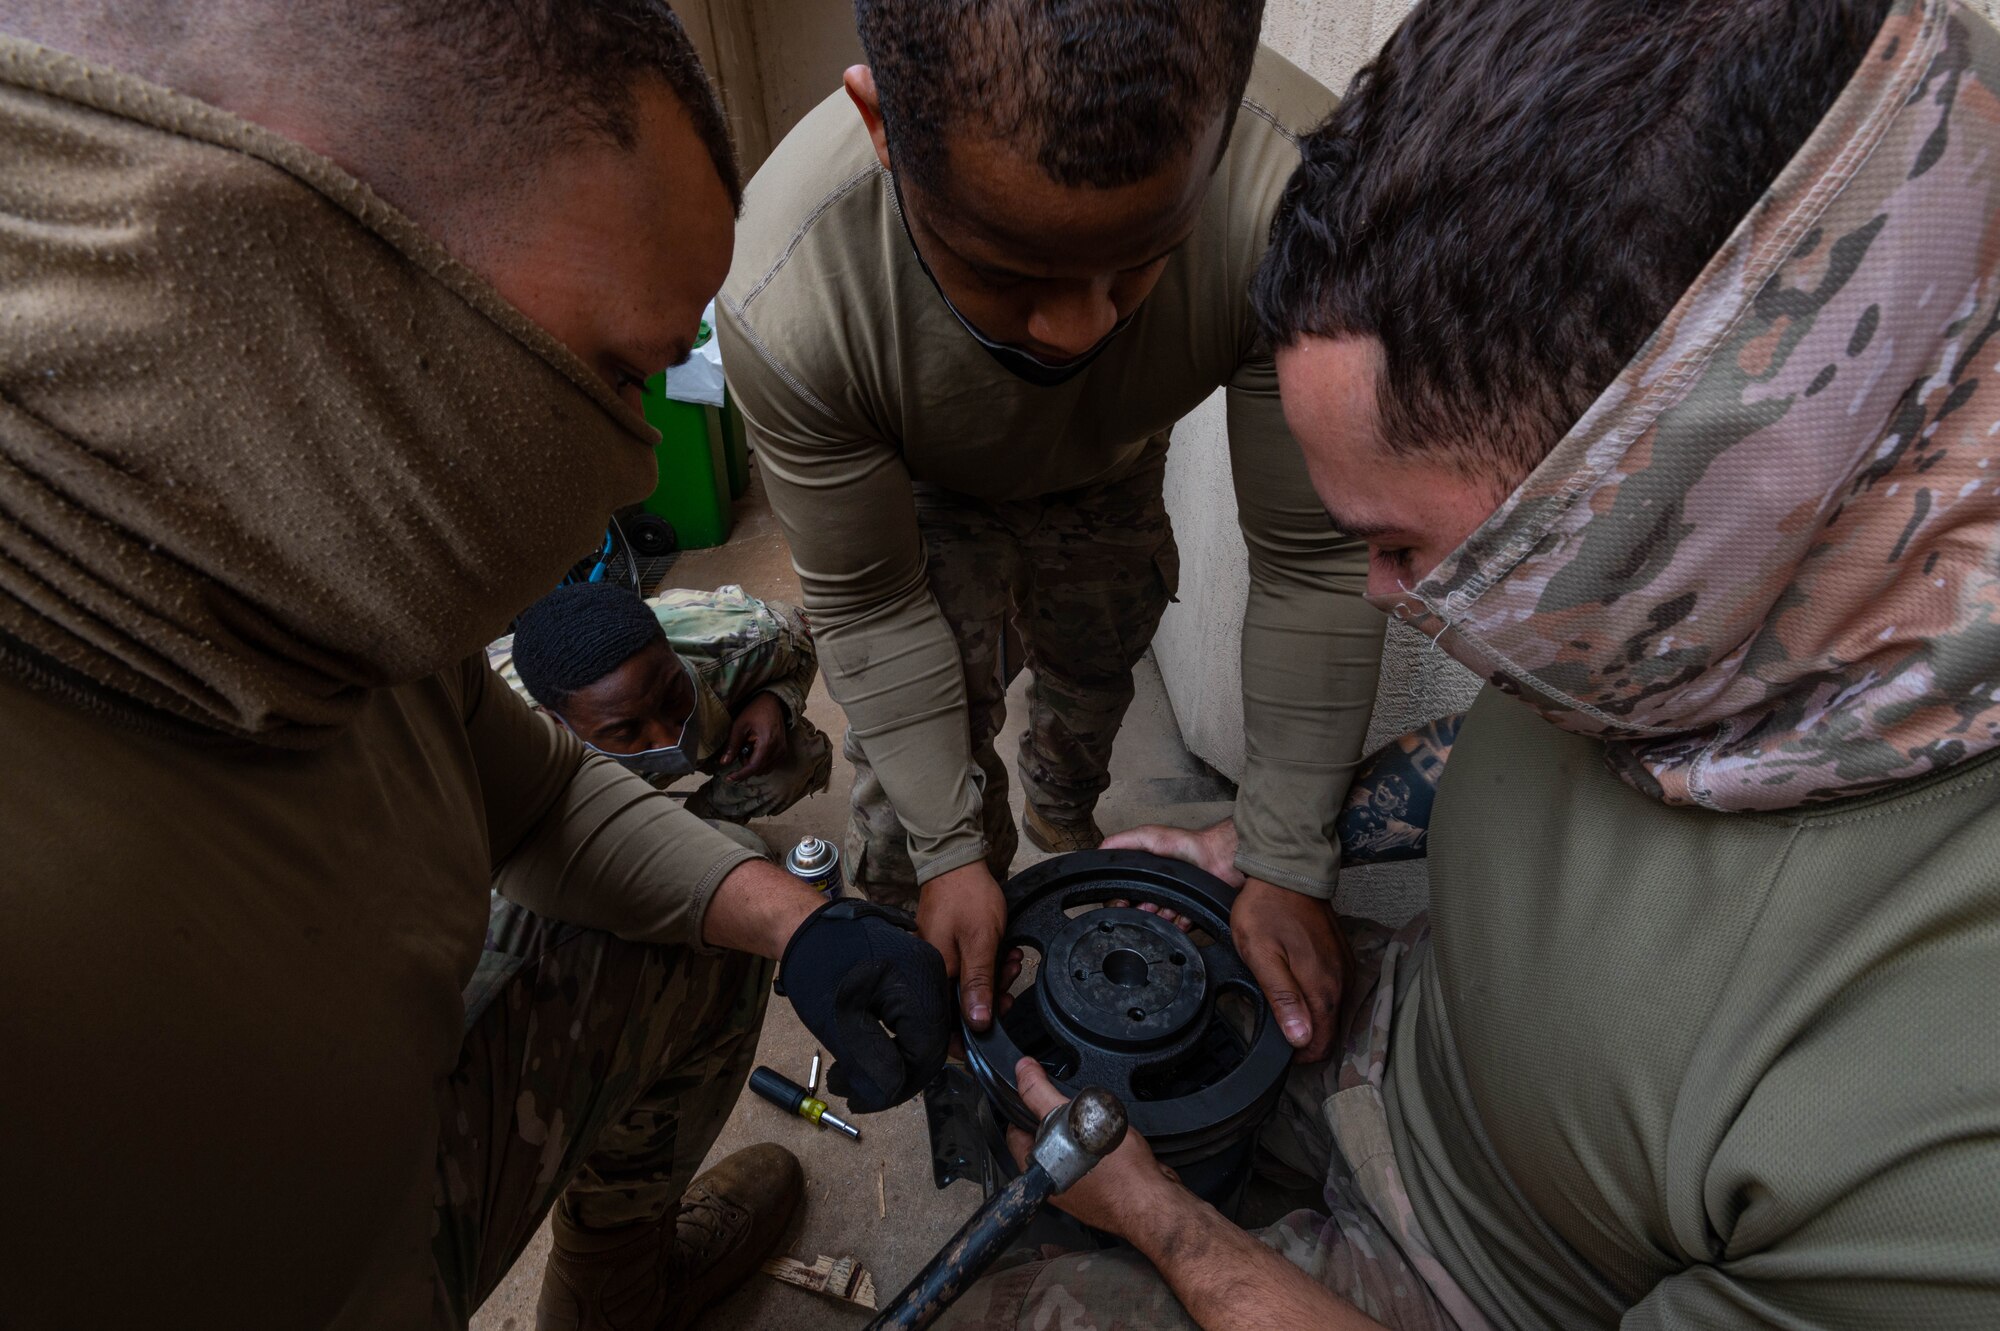 51st Civil Engineering Squadron heating ventilation and air conditioning (HVAC) technicians, take a usable pulley off of a defective motor and attach it to a working air handling unit motor